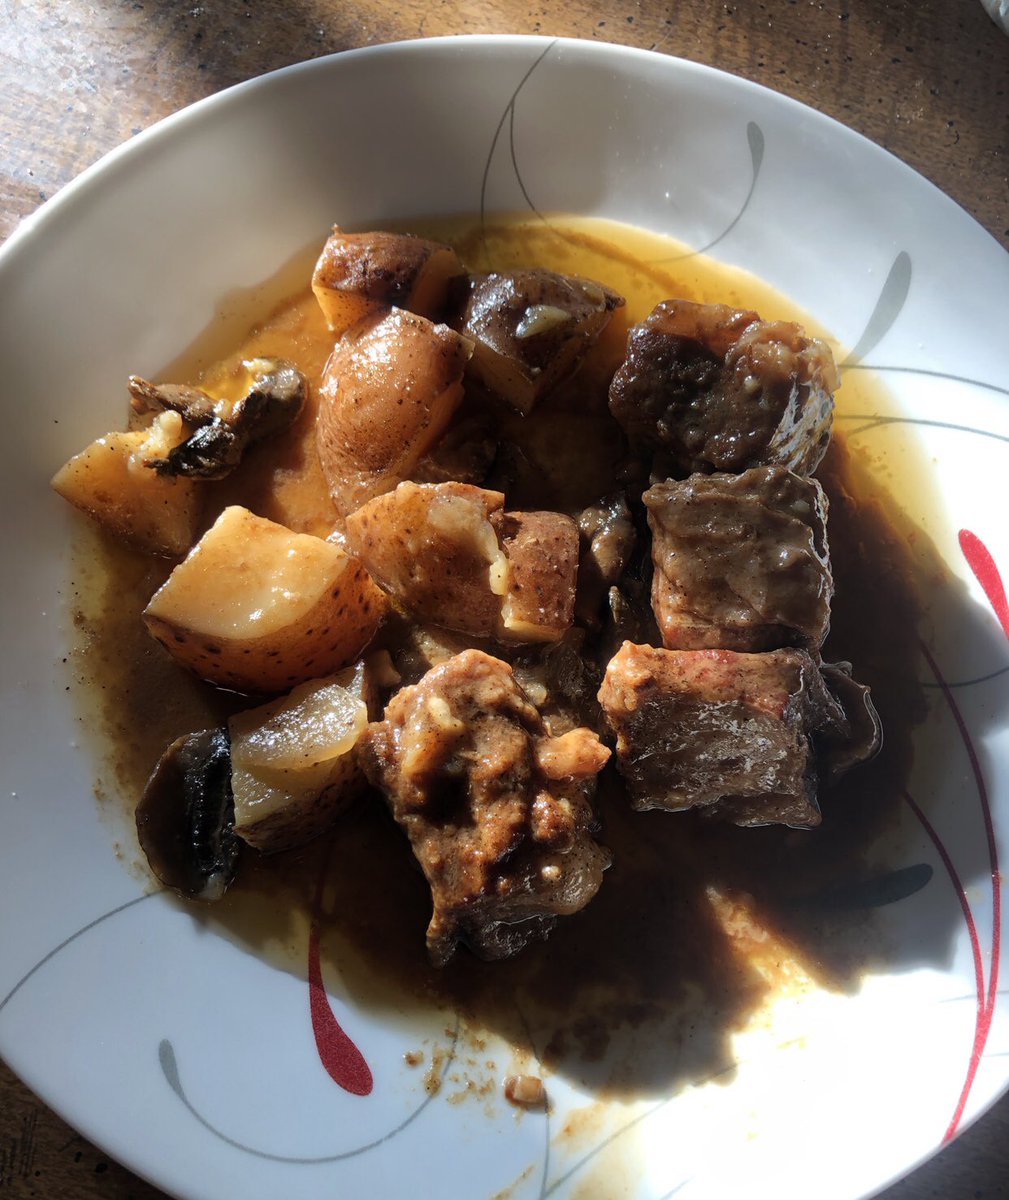 Beef short ribs with potatoes, onion & mushroom & some homemade vegetable soup 